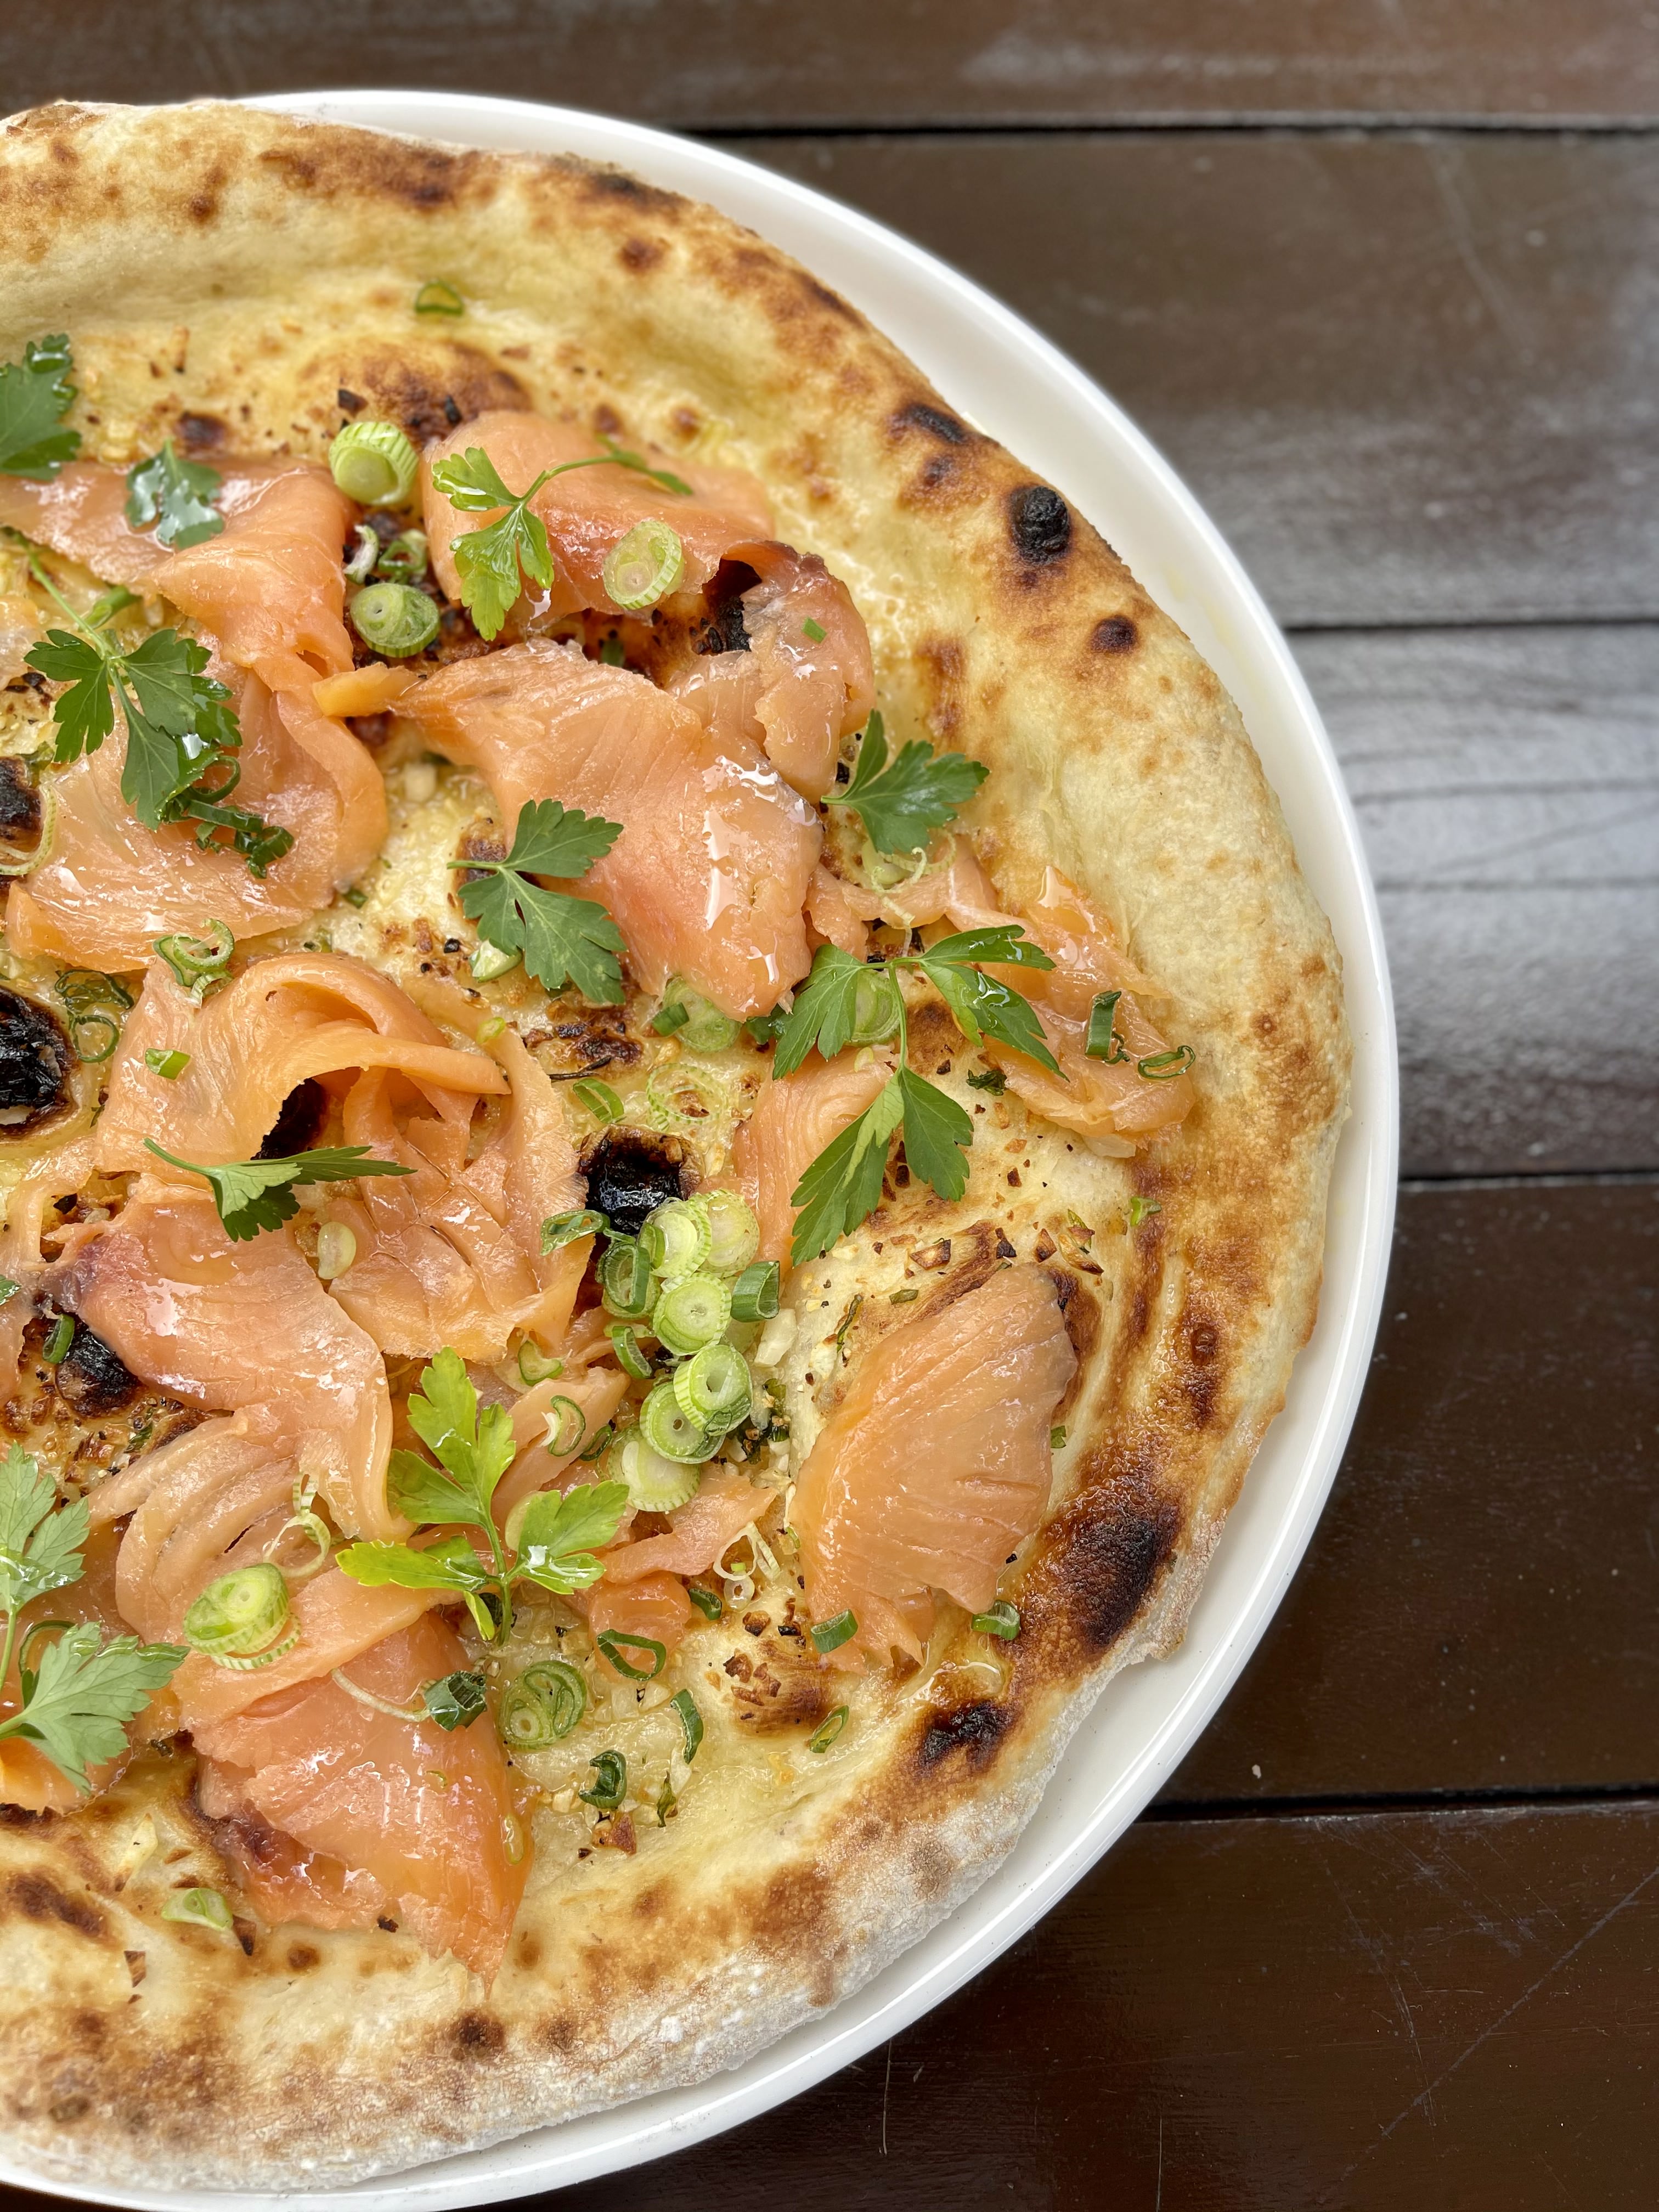 July's Special - Smoked Salmon Pizza II